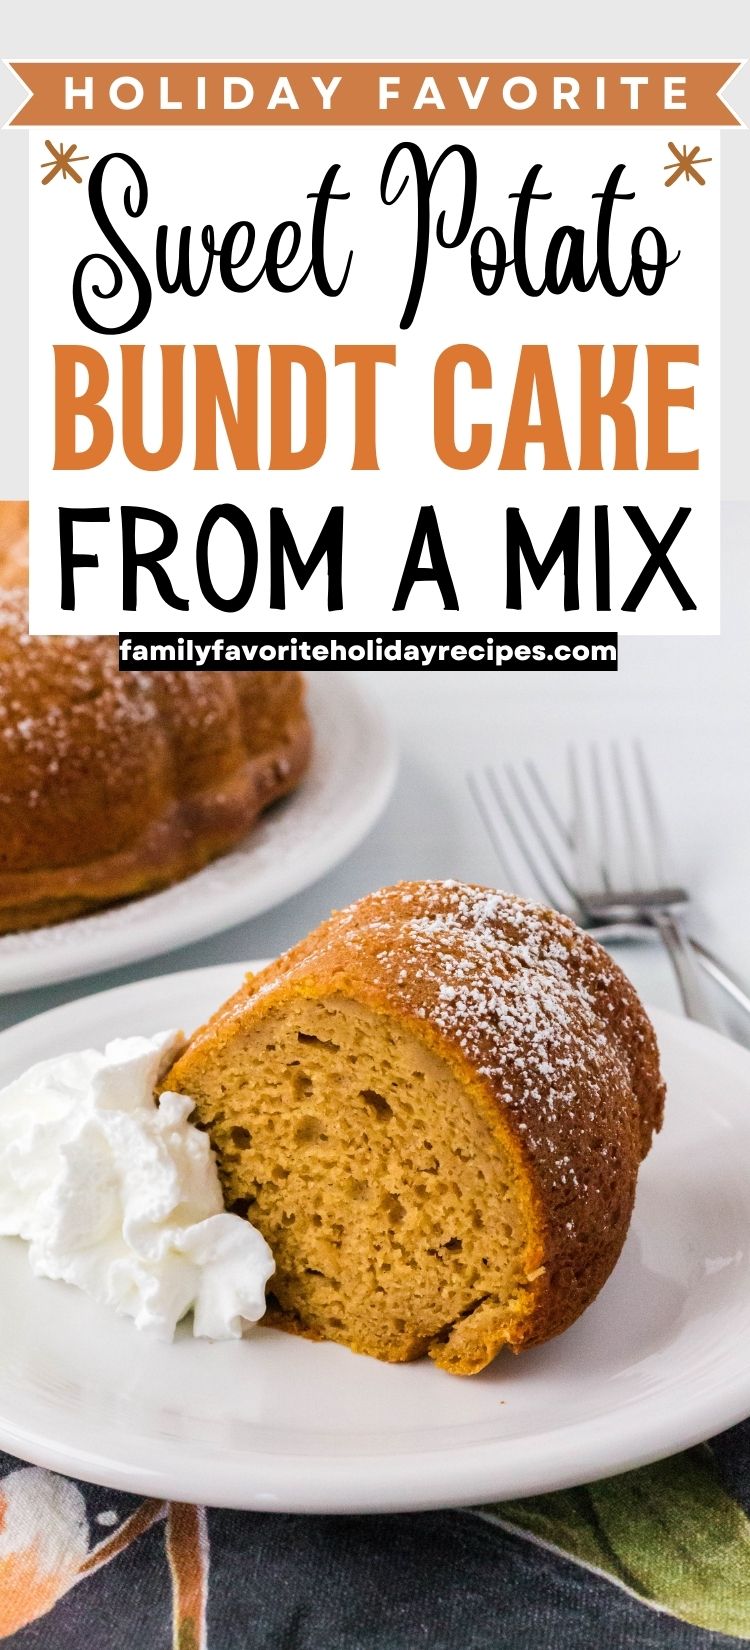 slice of sweet potato bundt cake with whipped cream, served on a white plate. Remaining bundt cake and two forks are in the background.